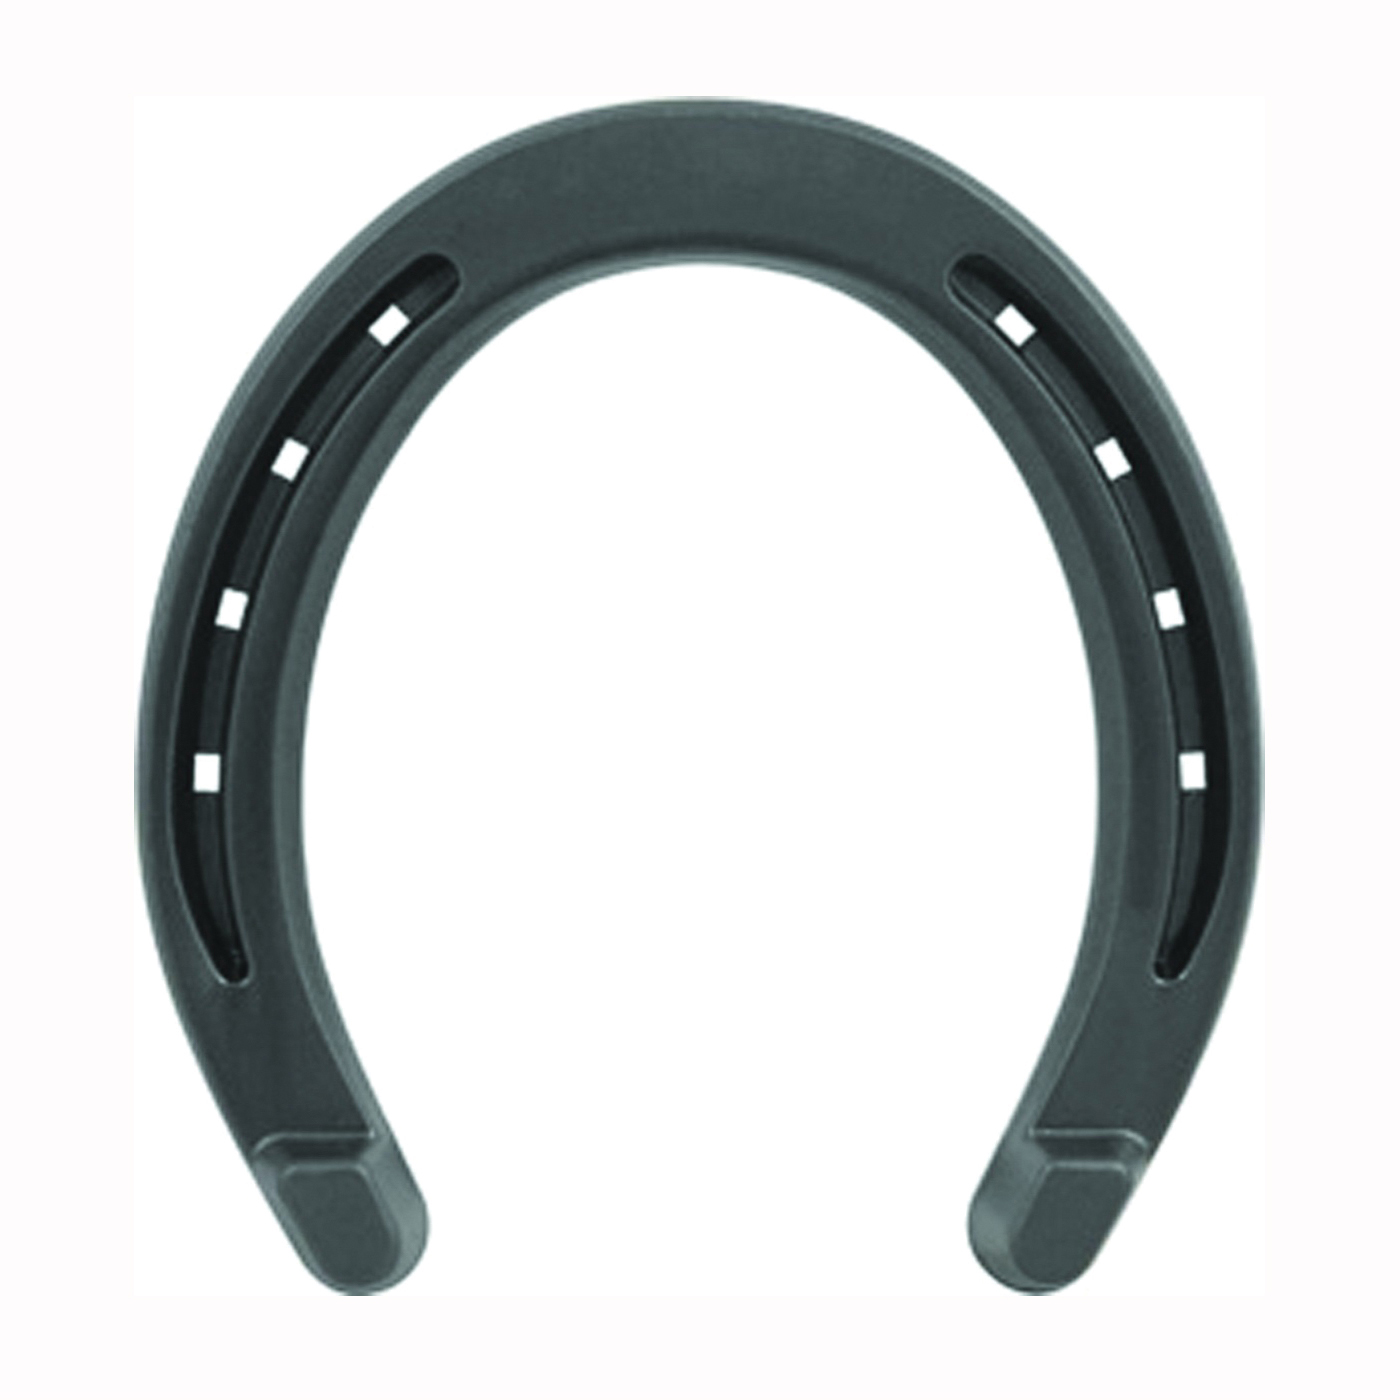 Farrier DC1HB Horseshoe, 1/4 in Thick, #1, Steel